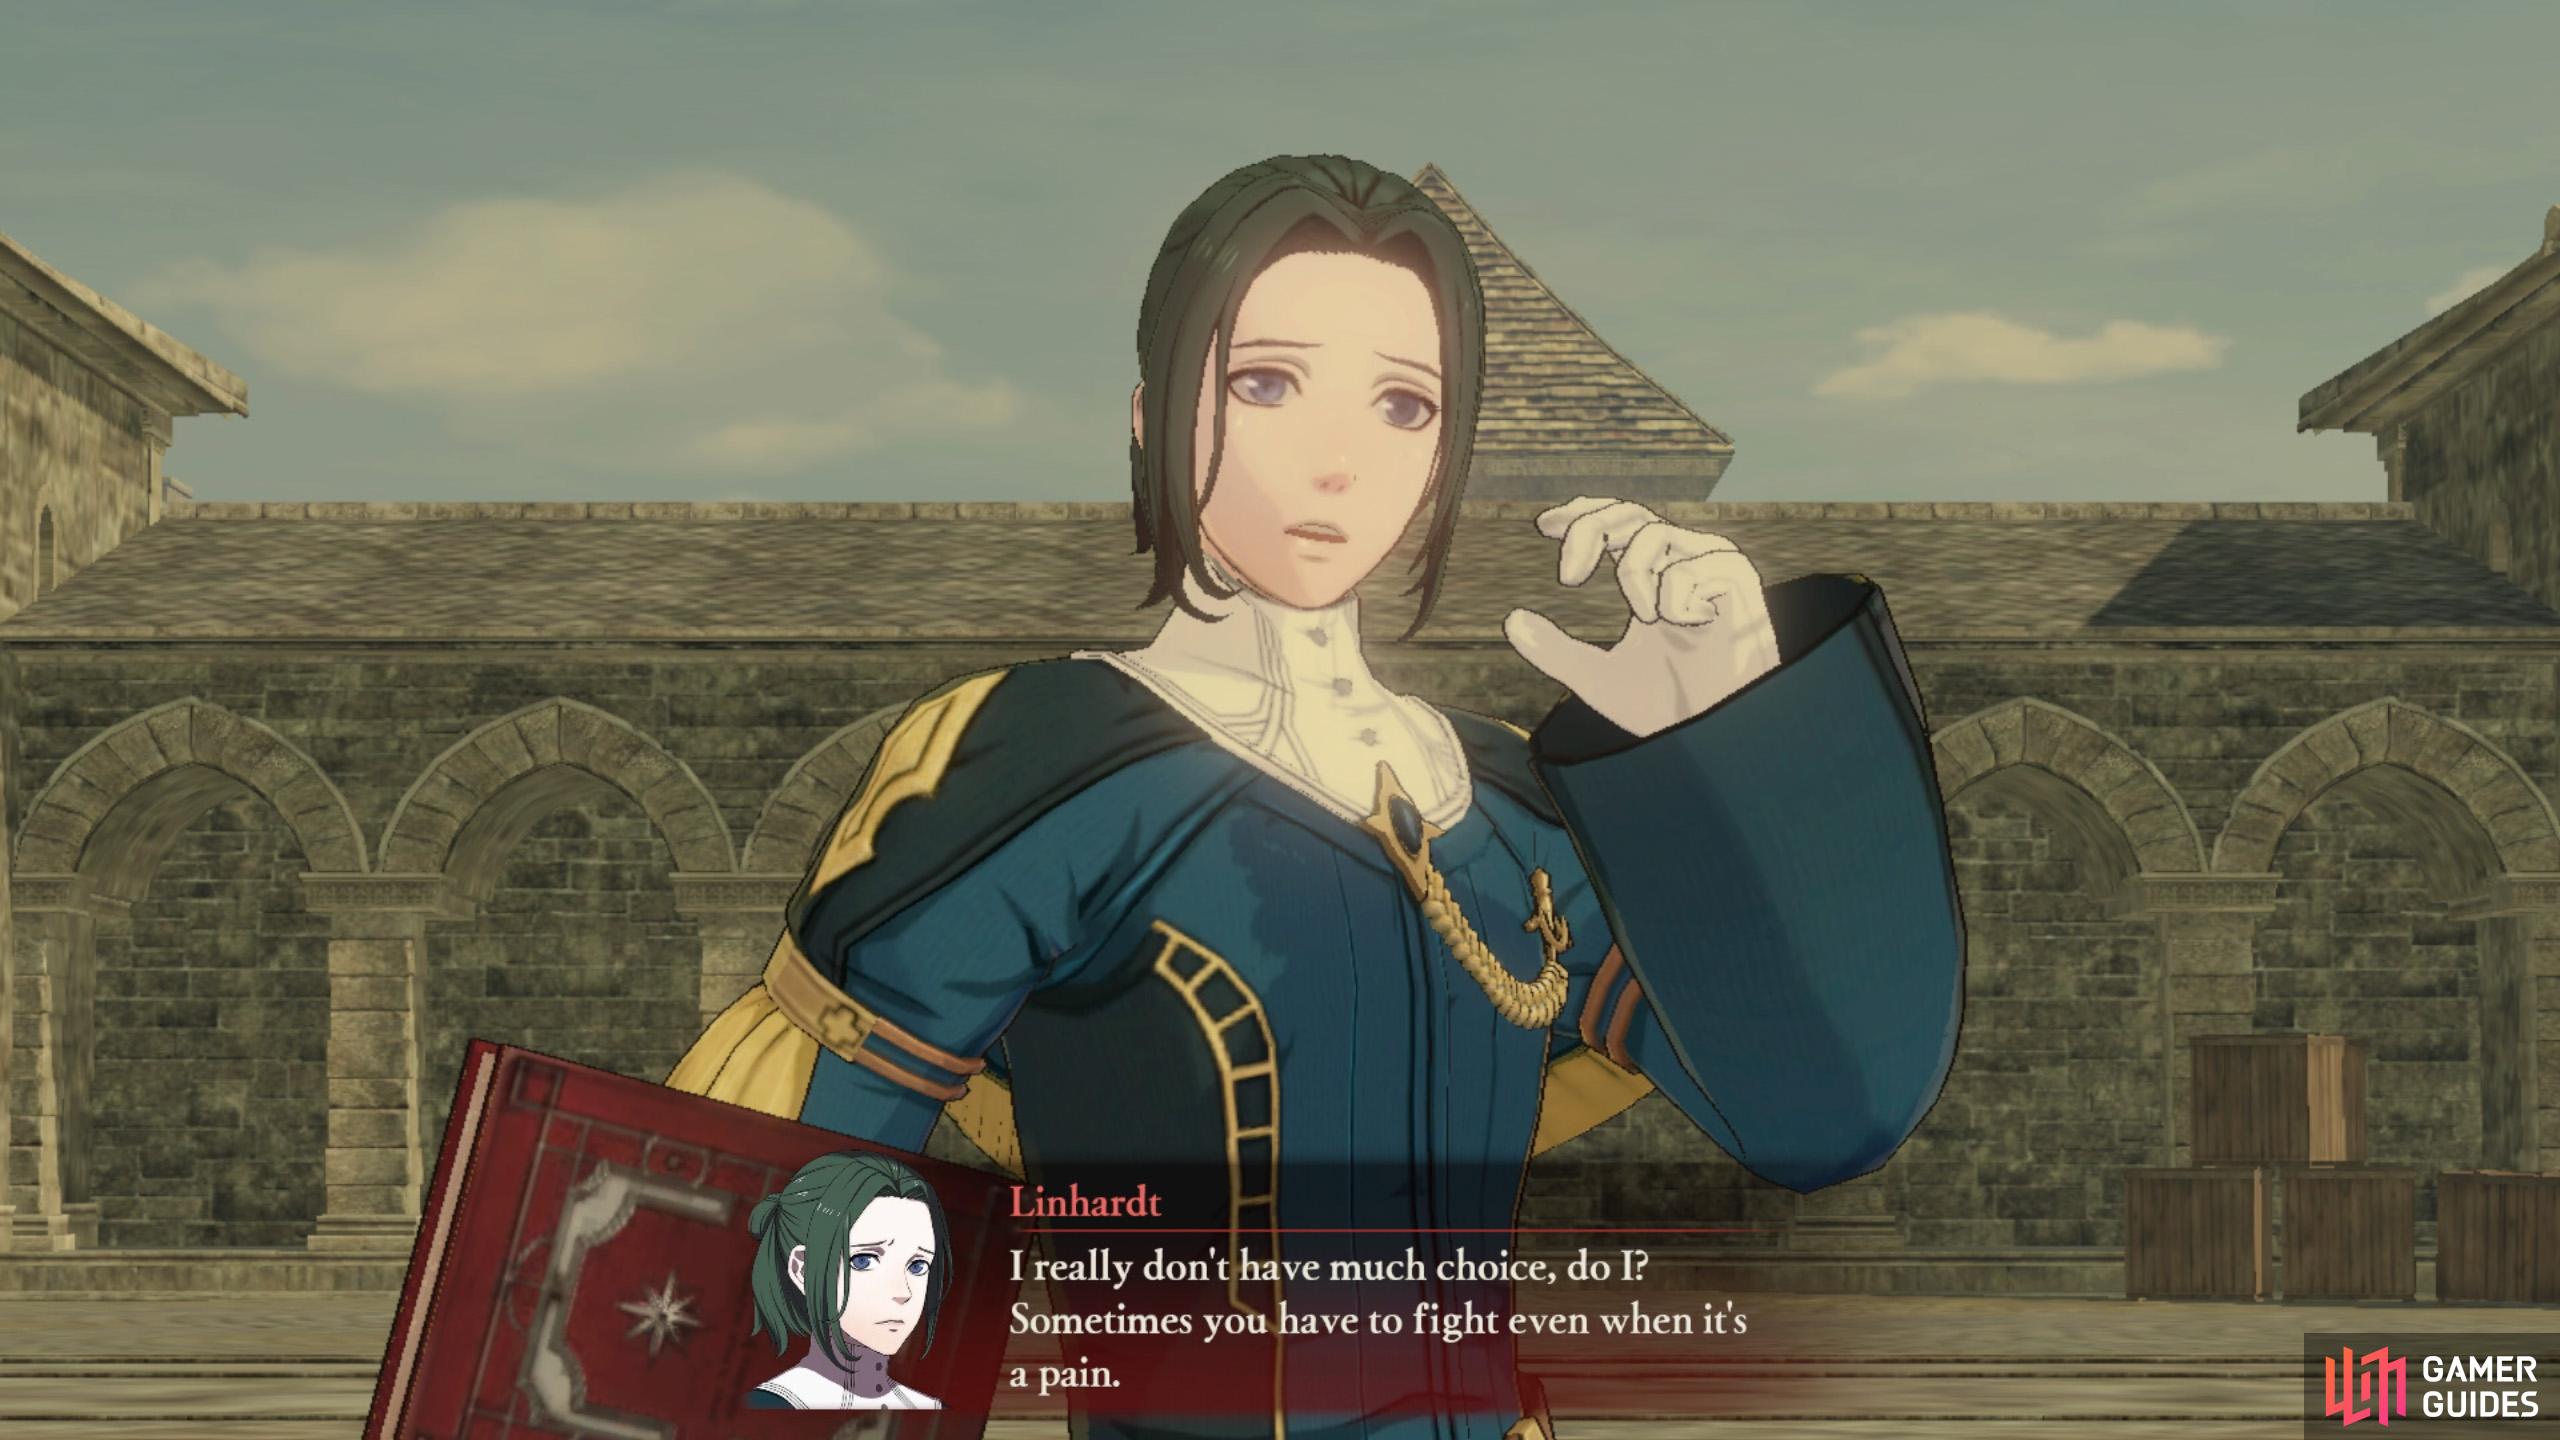 Linhardt isnt very invested in the war.